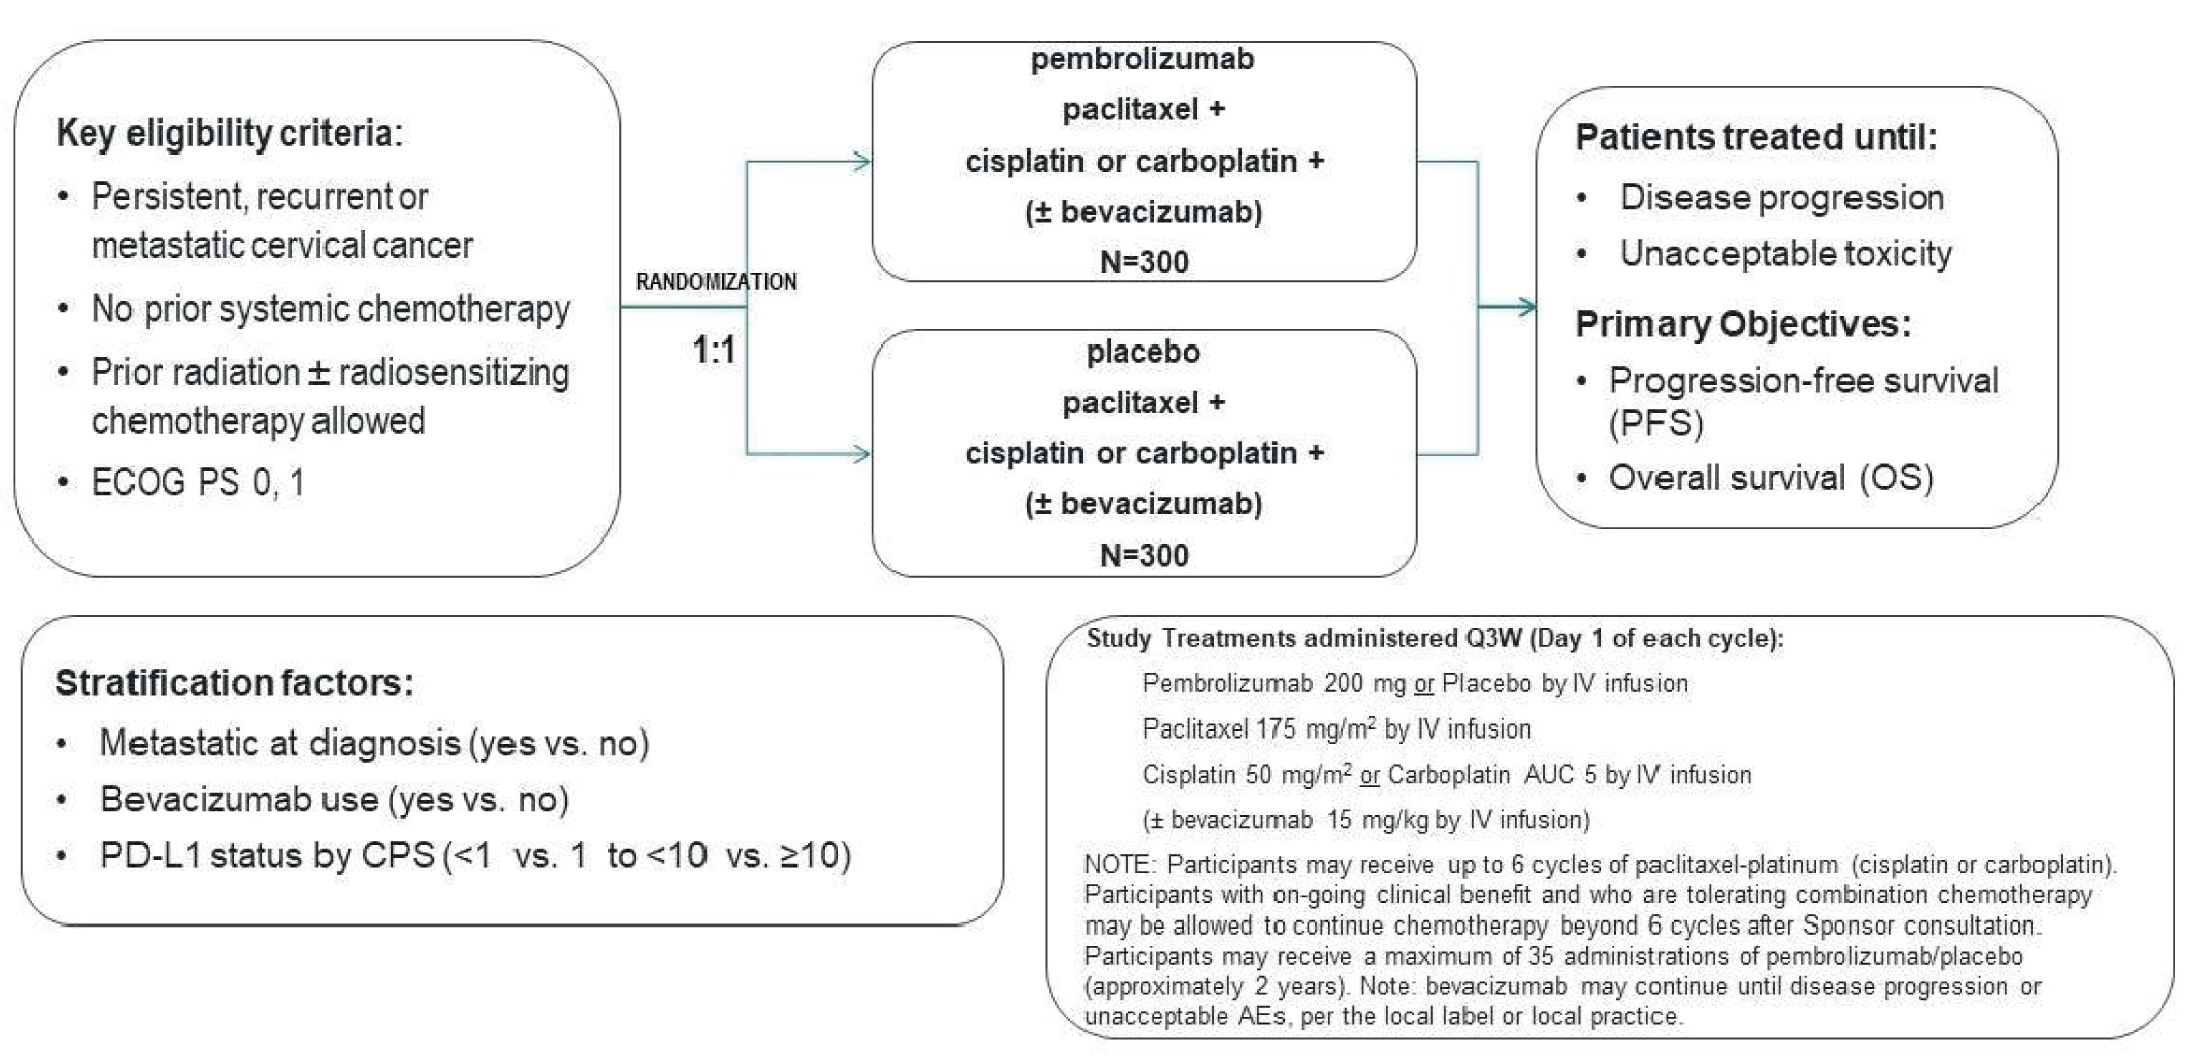 The figure shows the study schema for the KEYNOTE-826 study, in which patients that meet key eligibility criteria are randomized 1 to 1 to received either pembrolizumab plus SOC or placebo plus SOC. Patients are then treated until disease progression or unacceptable toxicity with the primary objectives being progression-free survival and overall survival. Stratification factors were metastasis at diagnosis, bevacizumab use, and PD-L1 status. Treatment dosing details are also listed.